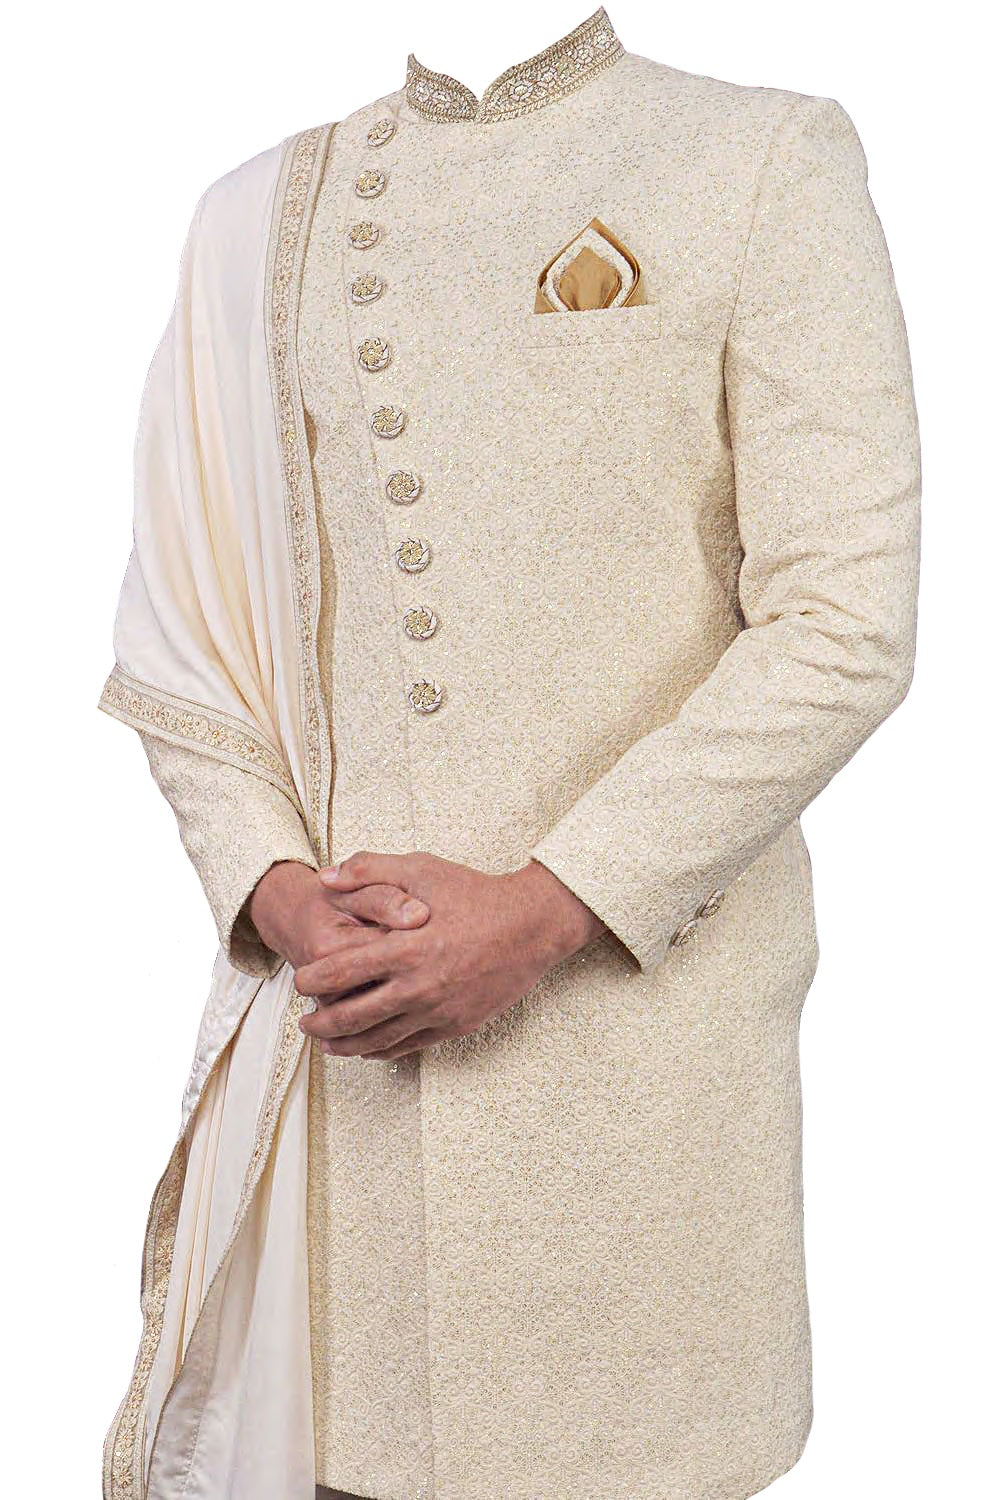 Indo-western style georgette creme/off-white colored sherwani with thread work embroidery & has shimmery white pant